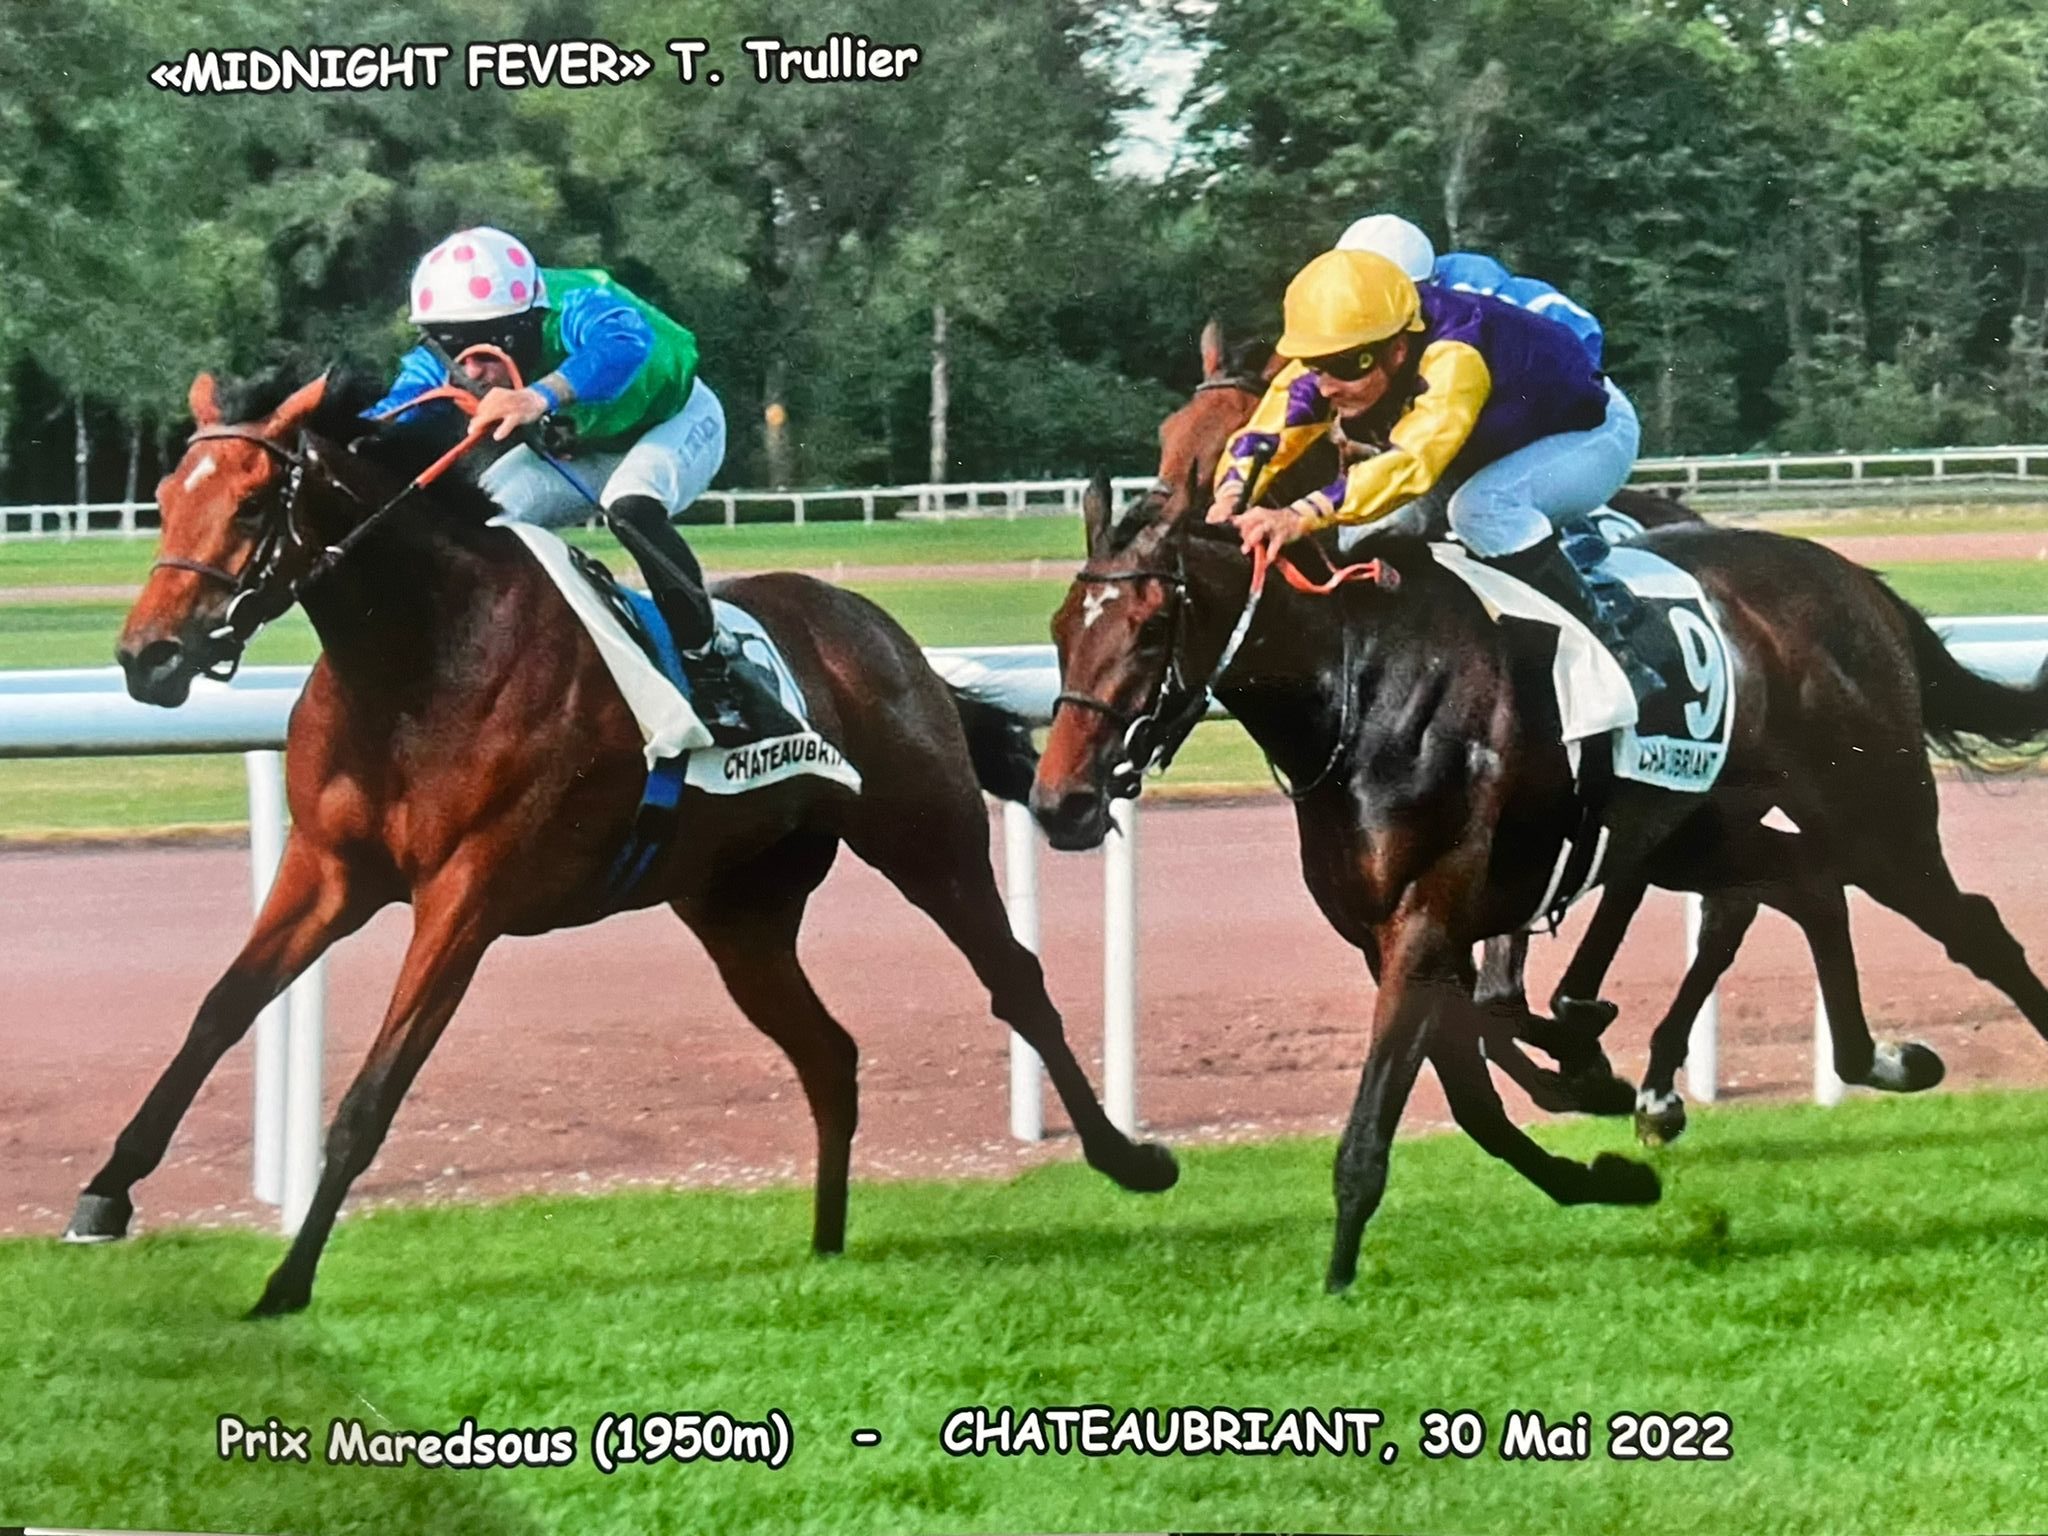 Midnight Fever wins Chateaubriant